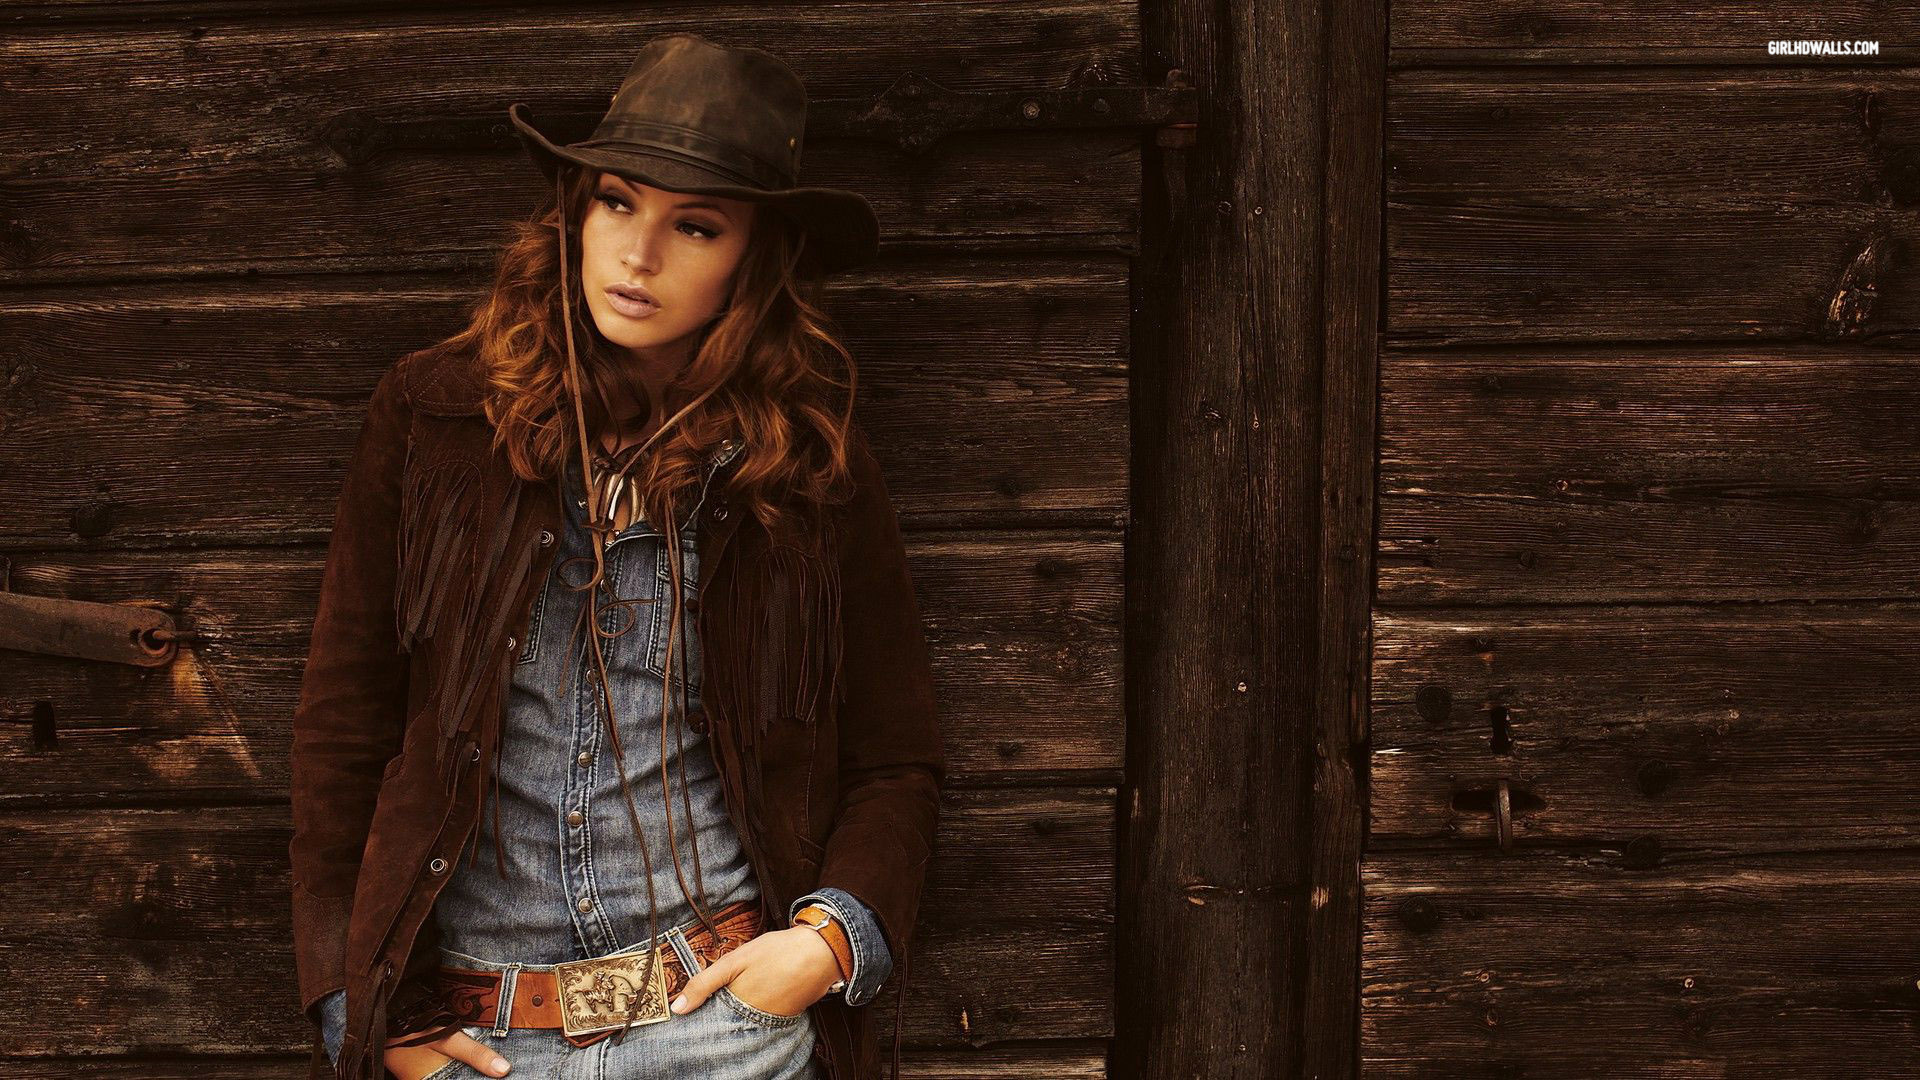 Cowgirl Editorial wallpaper #6856